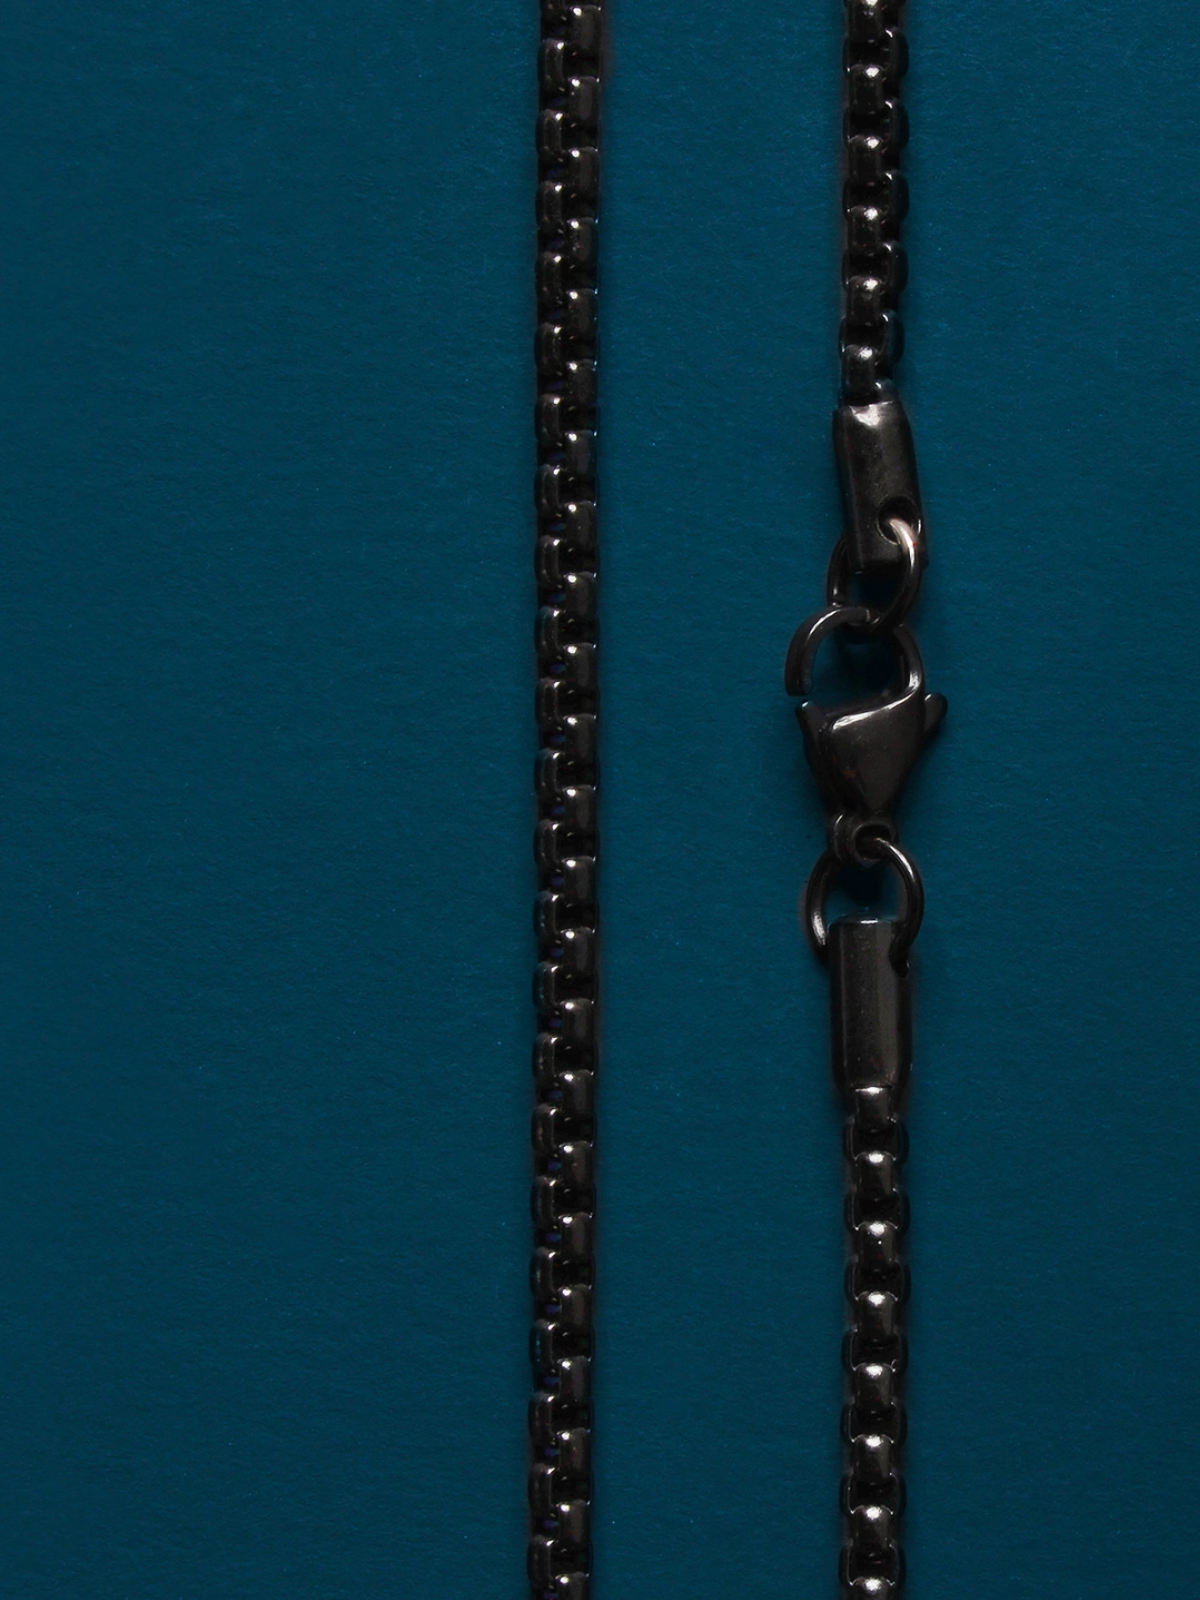 Black Stainless Steel Chain Necklace